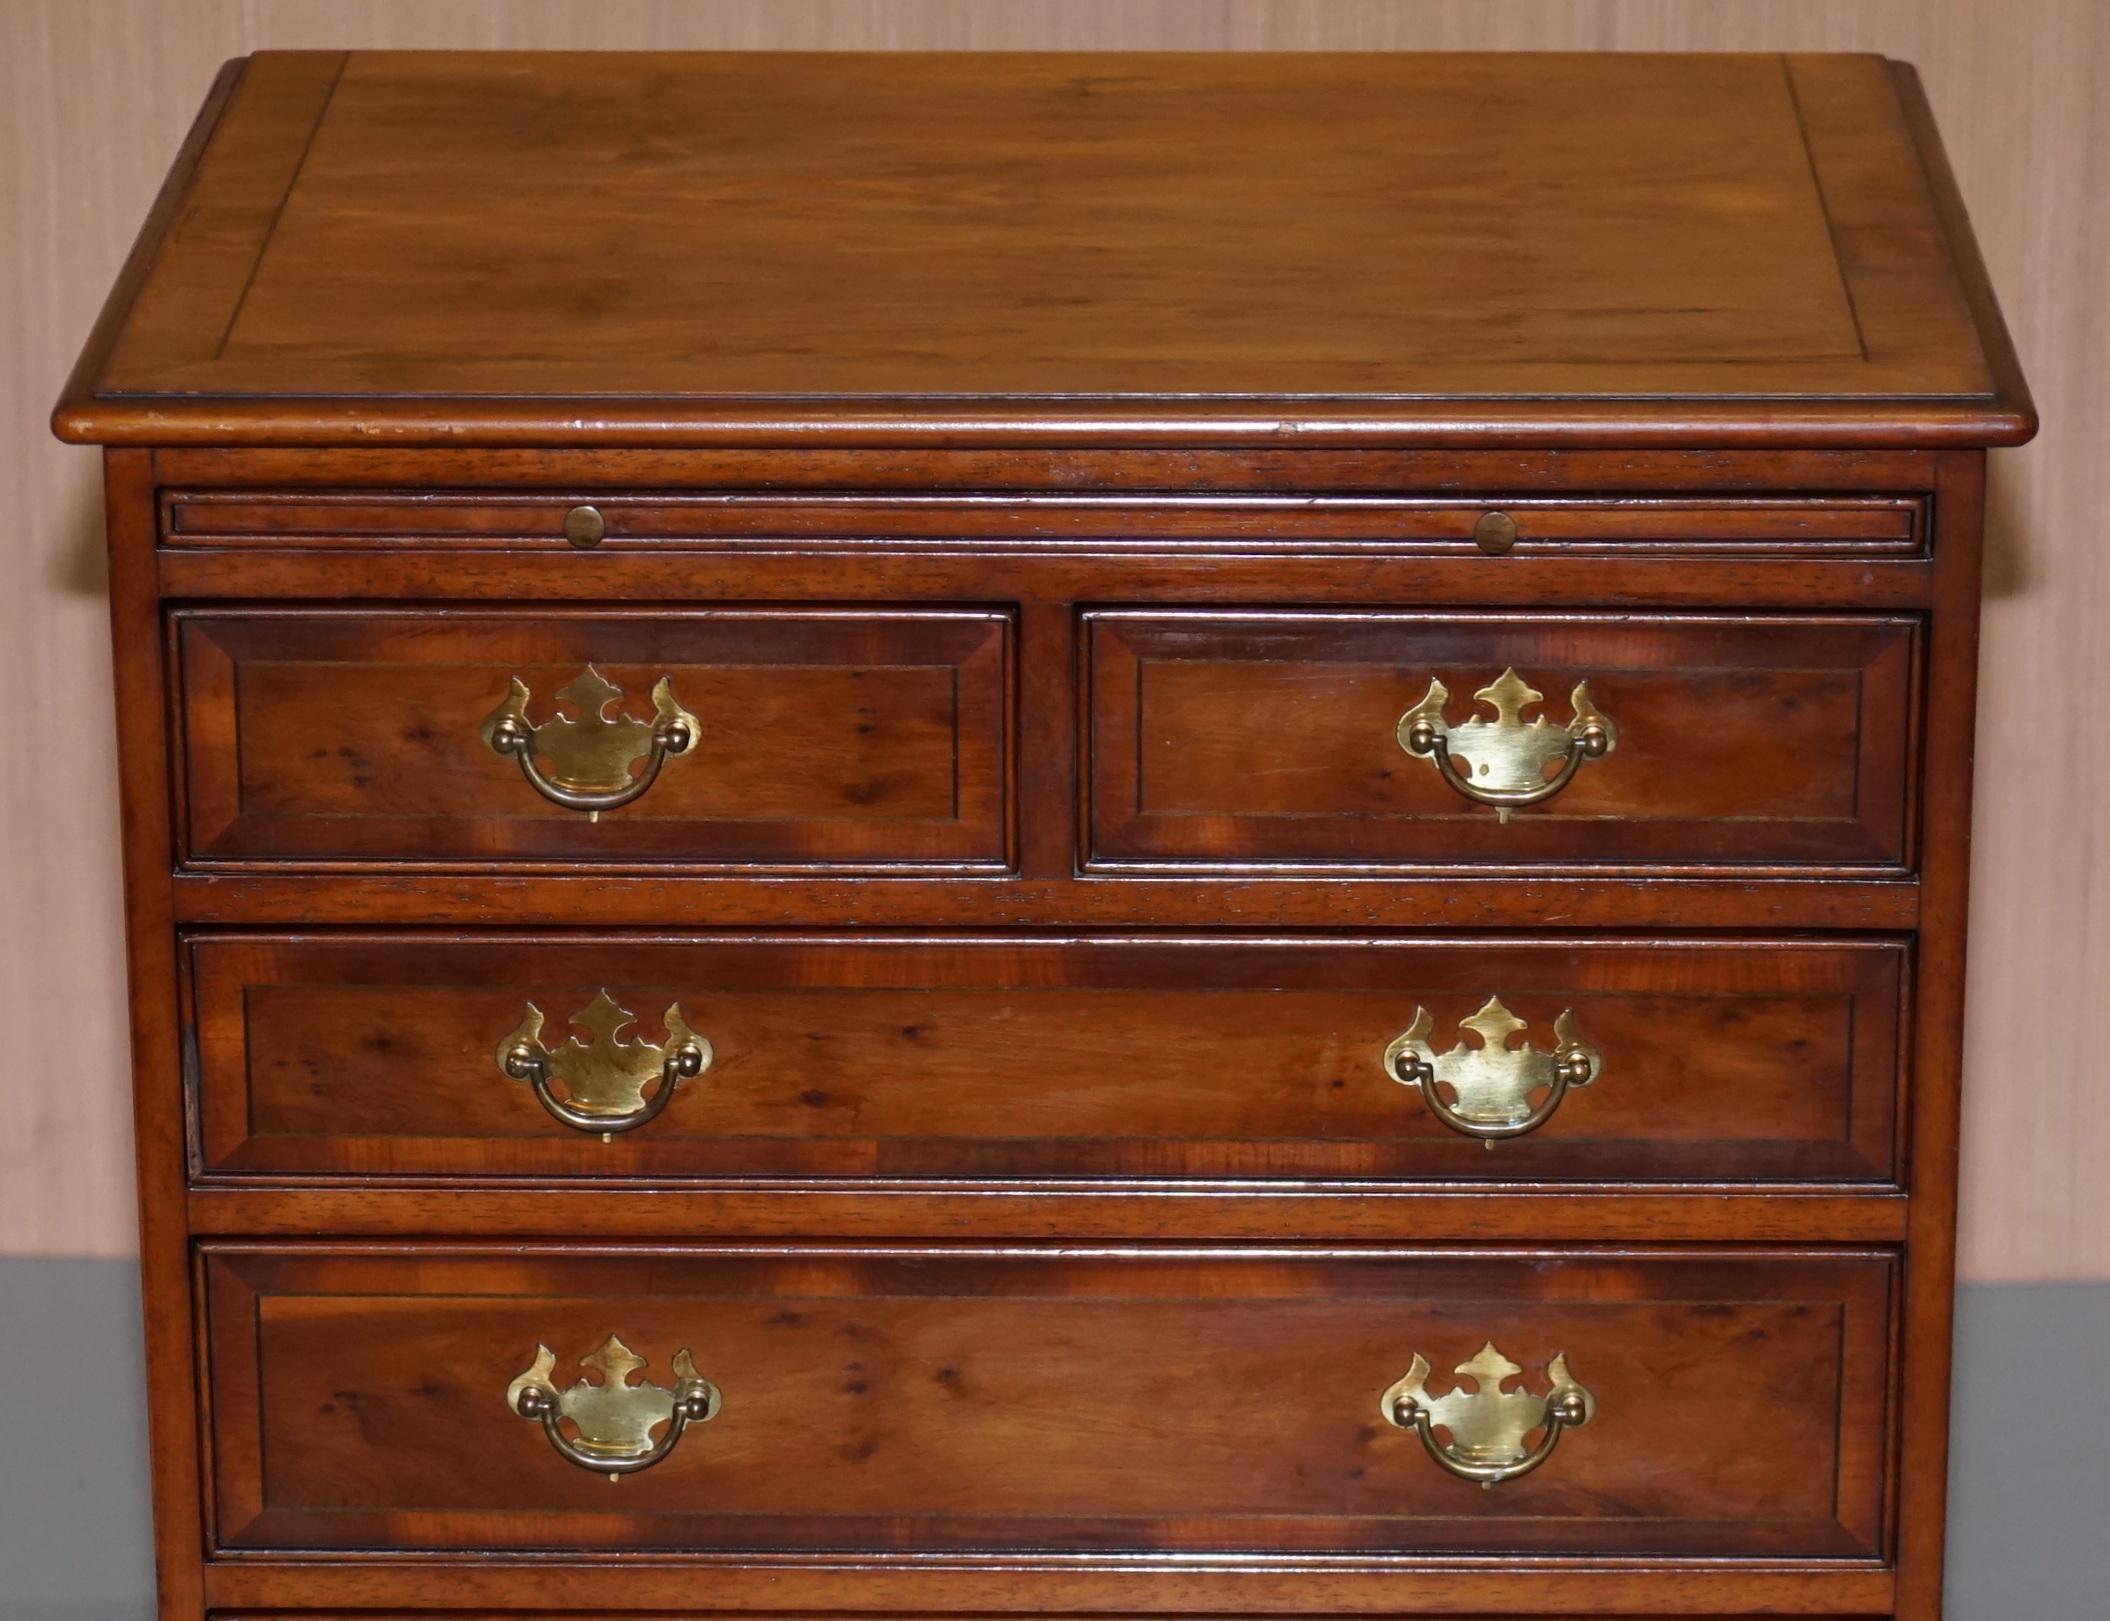 English Burr Yew Wood Chest of Drawers Butlers Leather Serving Tray Large Side Table For Sale